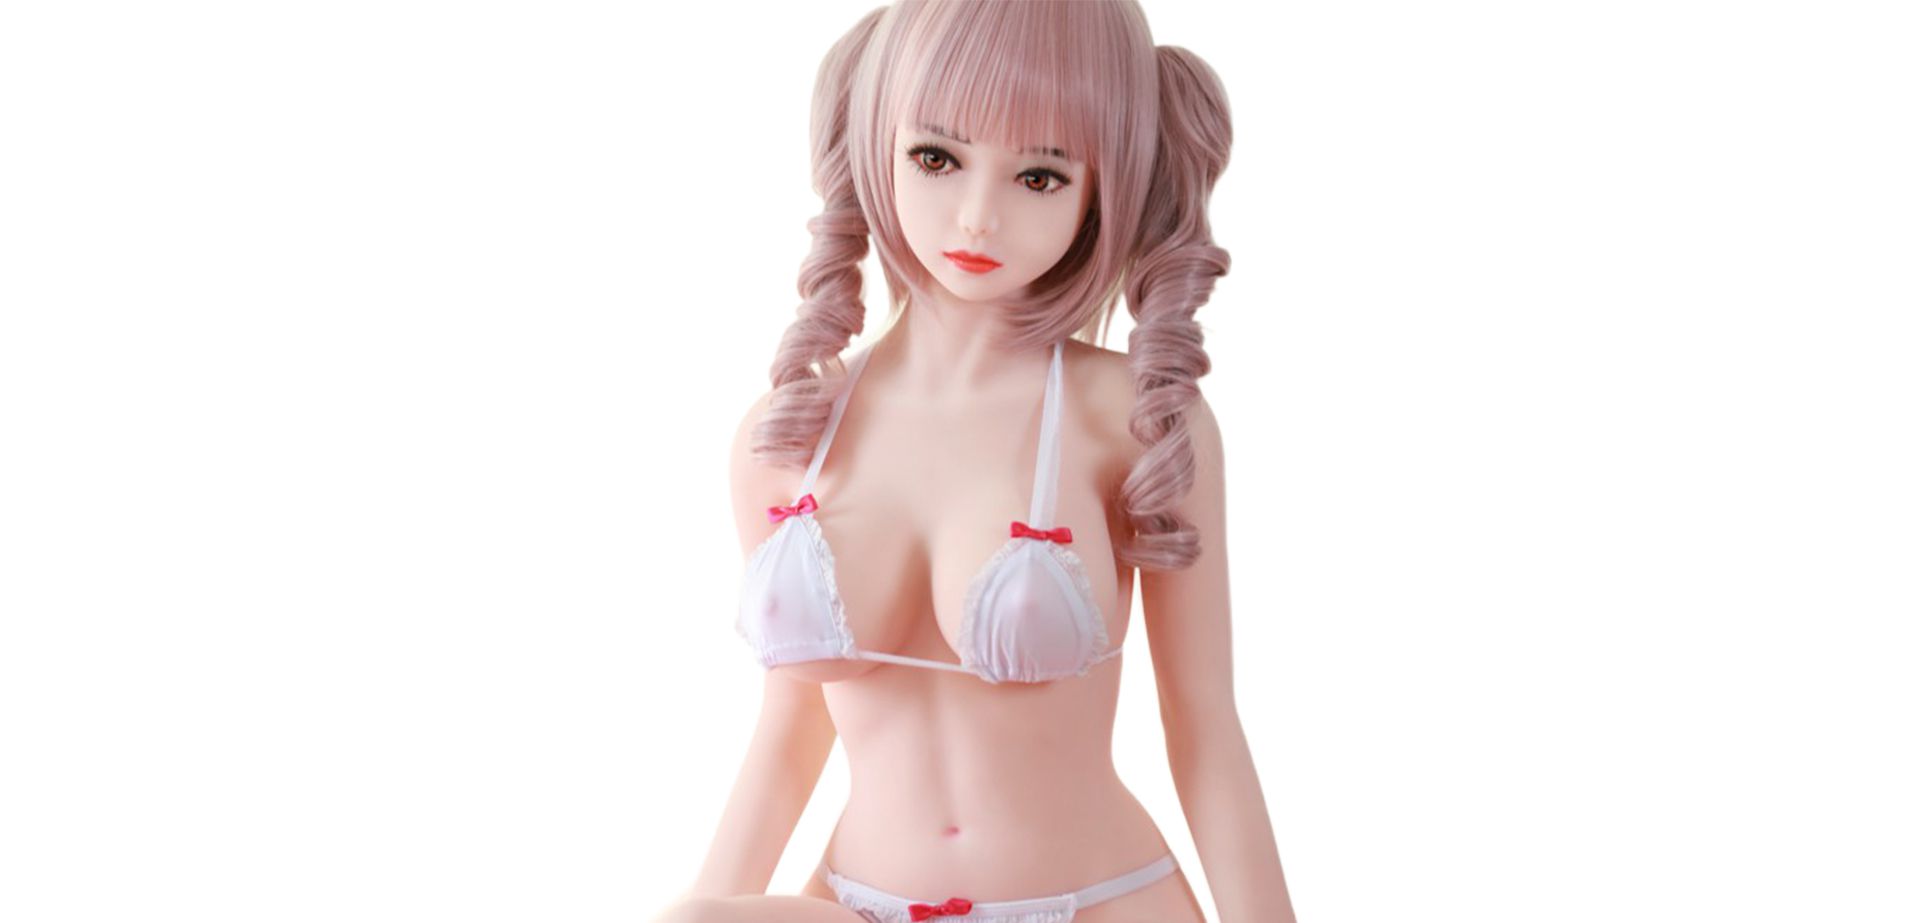 Pink-haired 100 cm doll.